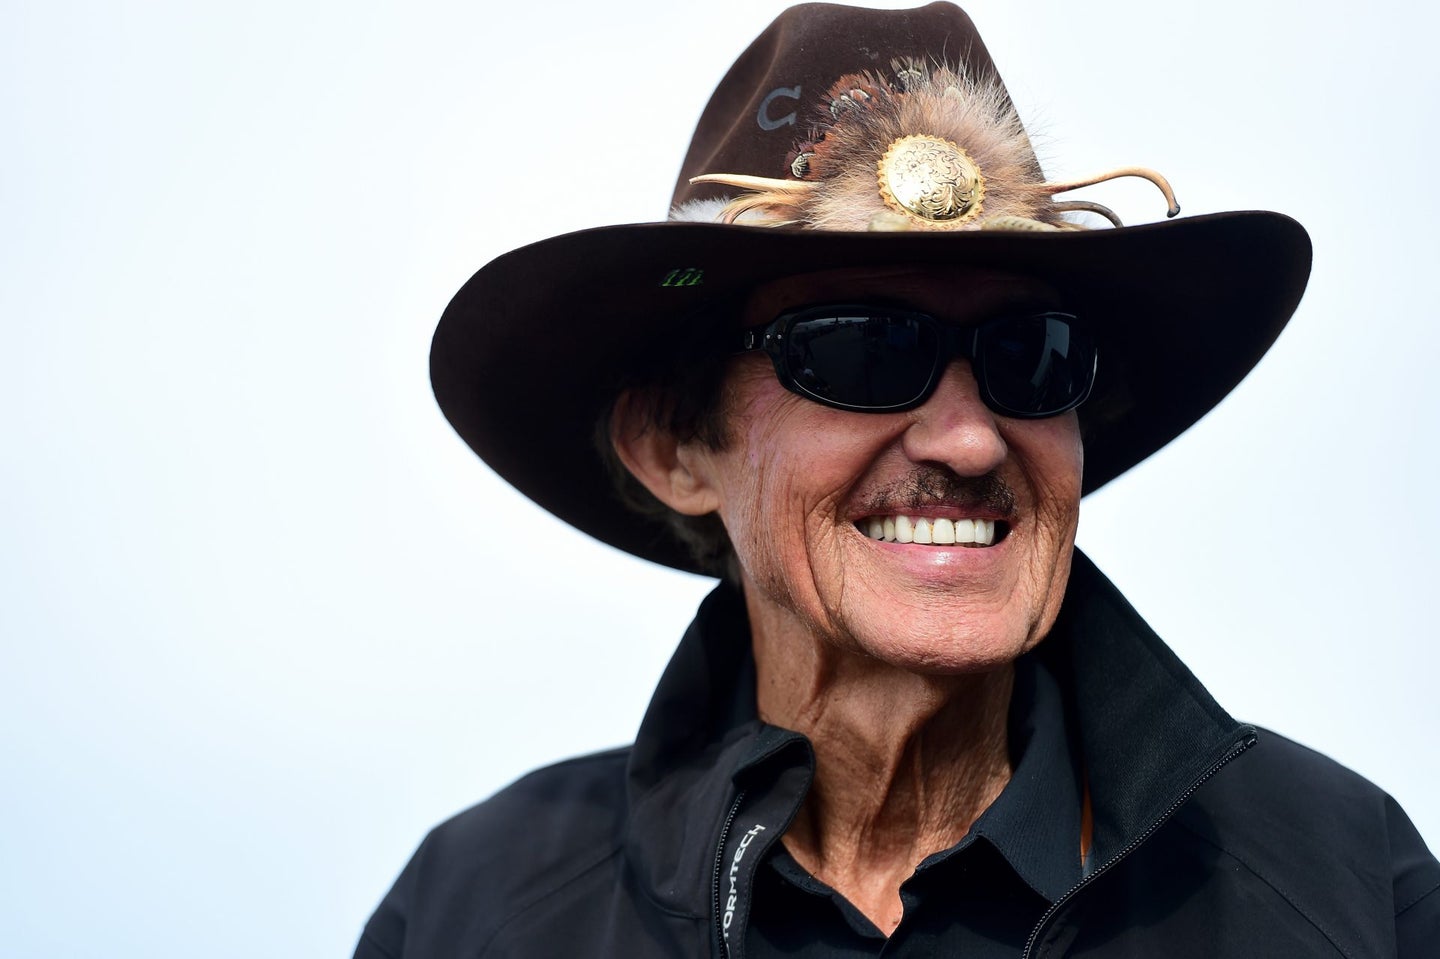 NASCAR Legend Richard Petty to Auction Cars and Trophies